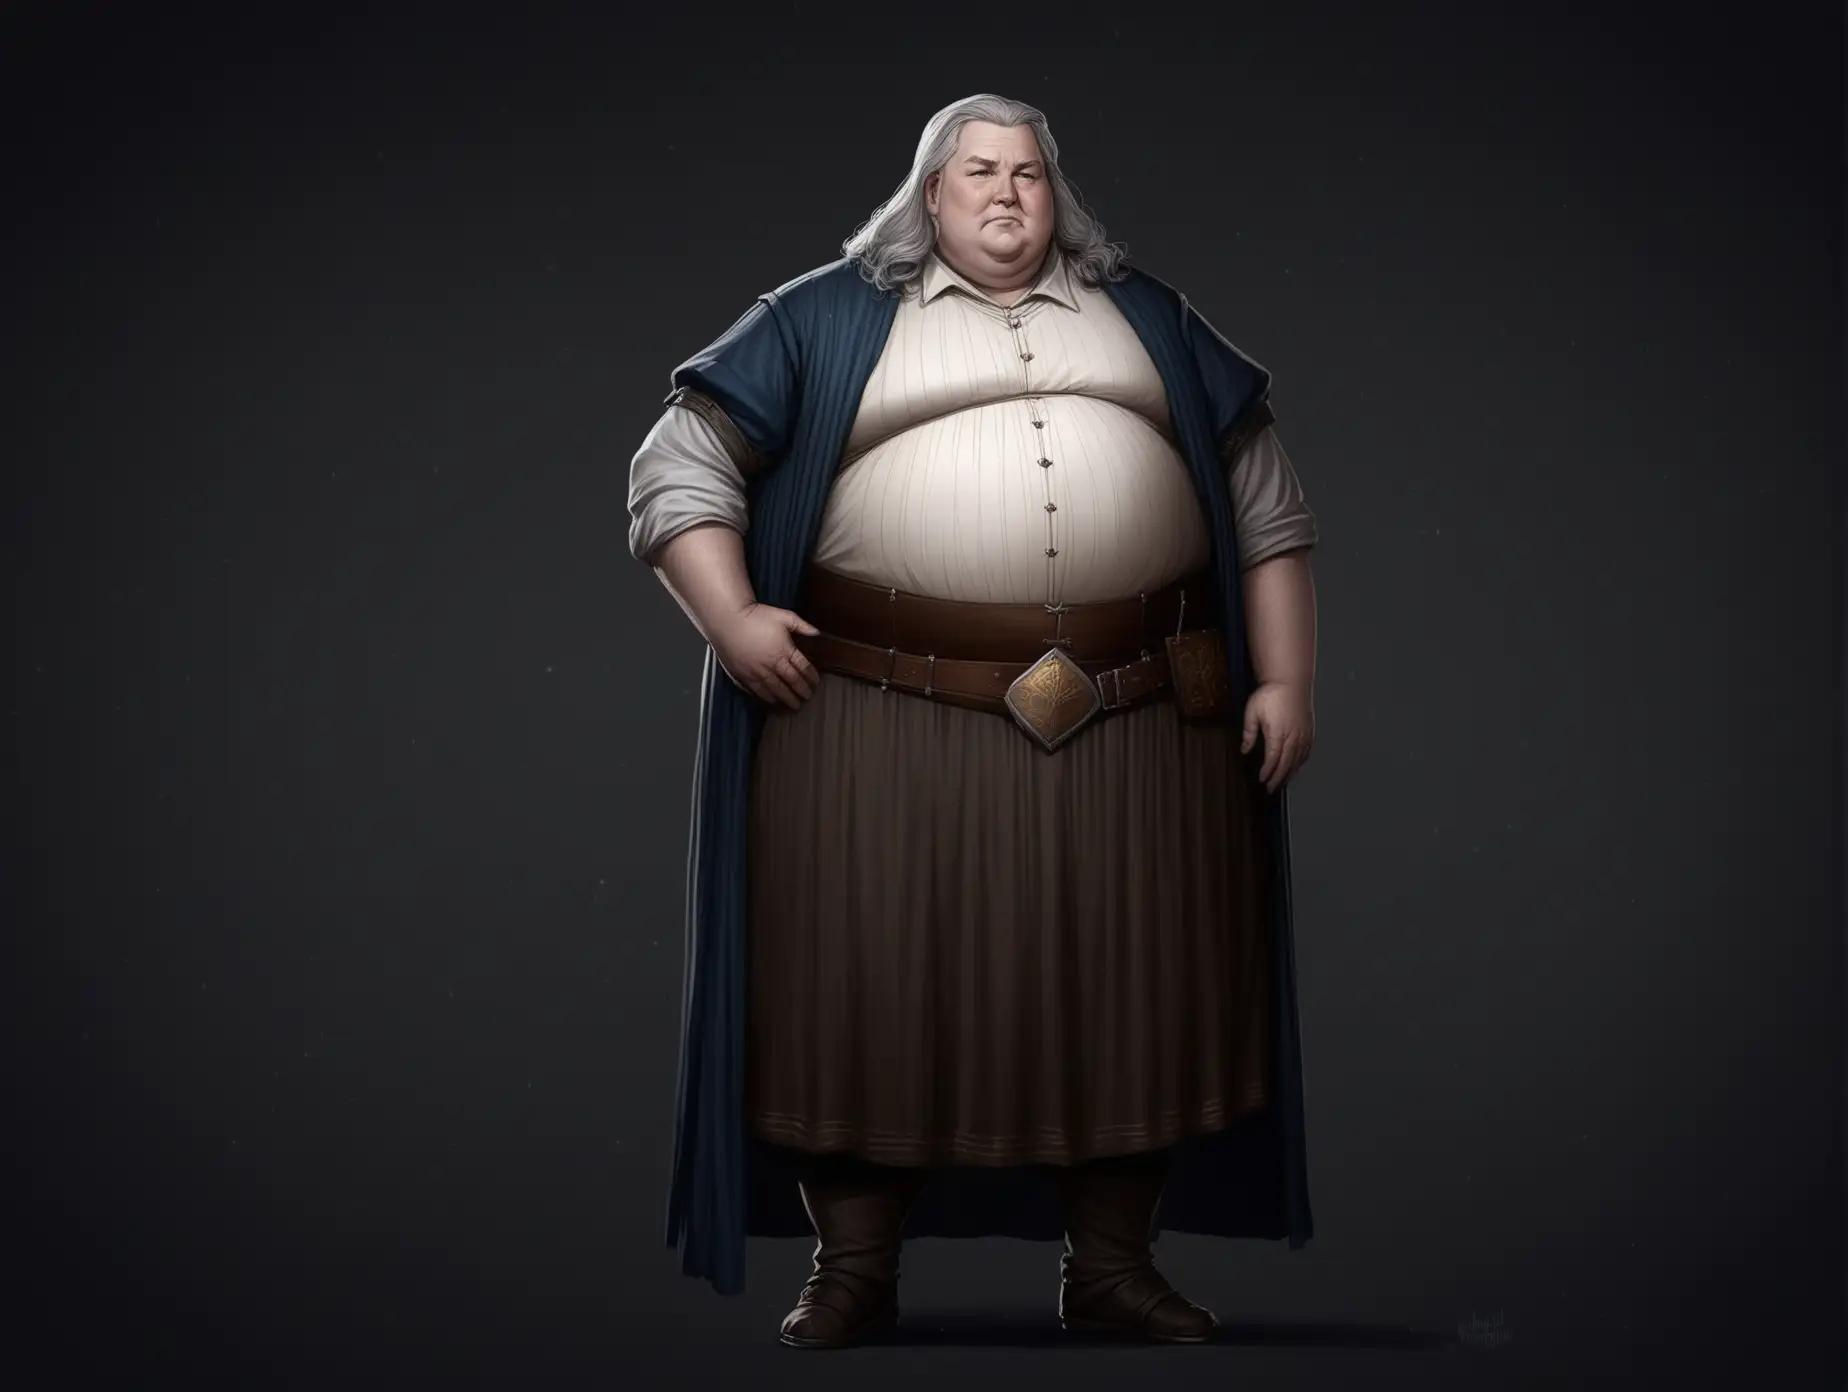 Medieval-Fantasy-Character-Plump-Accountant-in-Dark-Ambiance